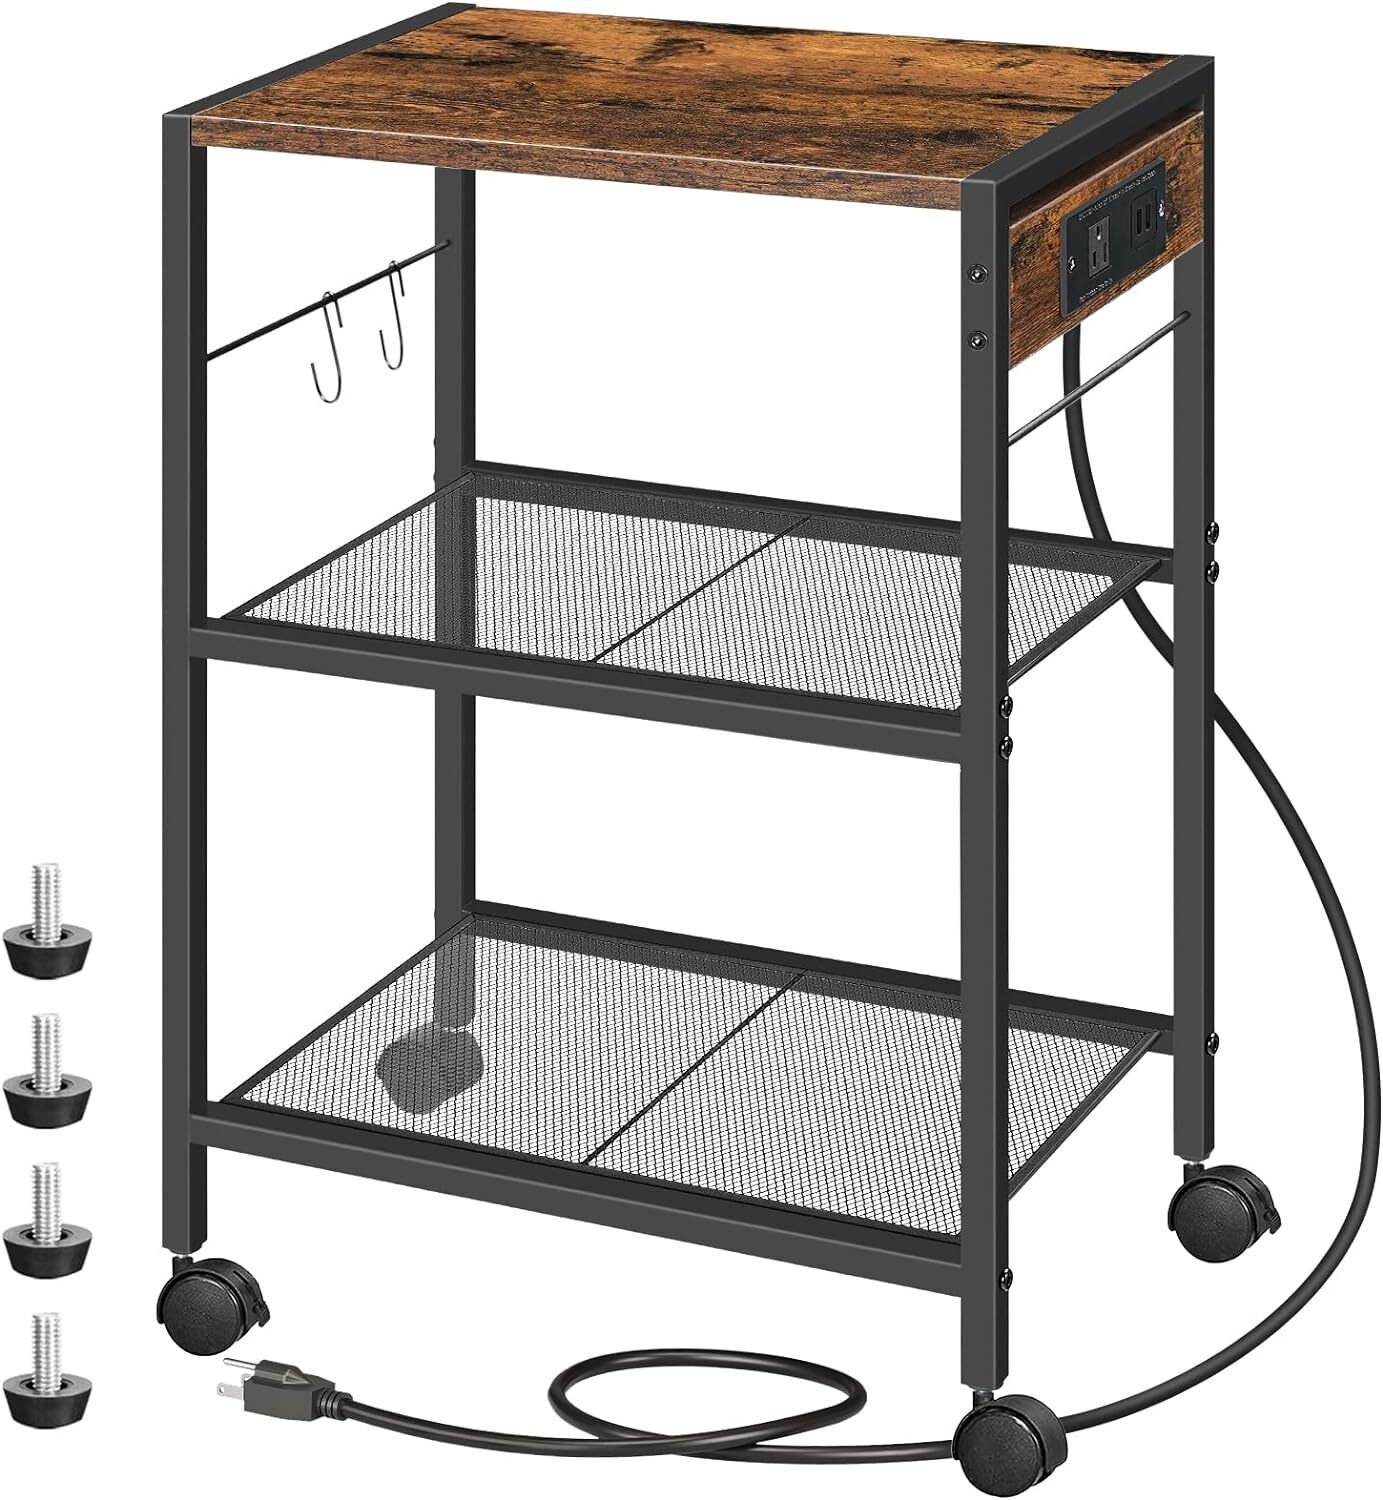 Printer Stand Mobile Printer Table Rolling Cart with Power Outlets and USB Ports